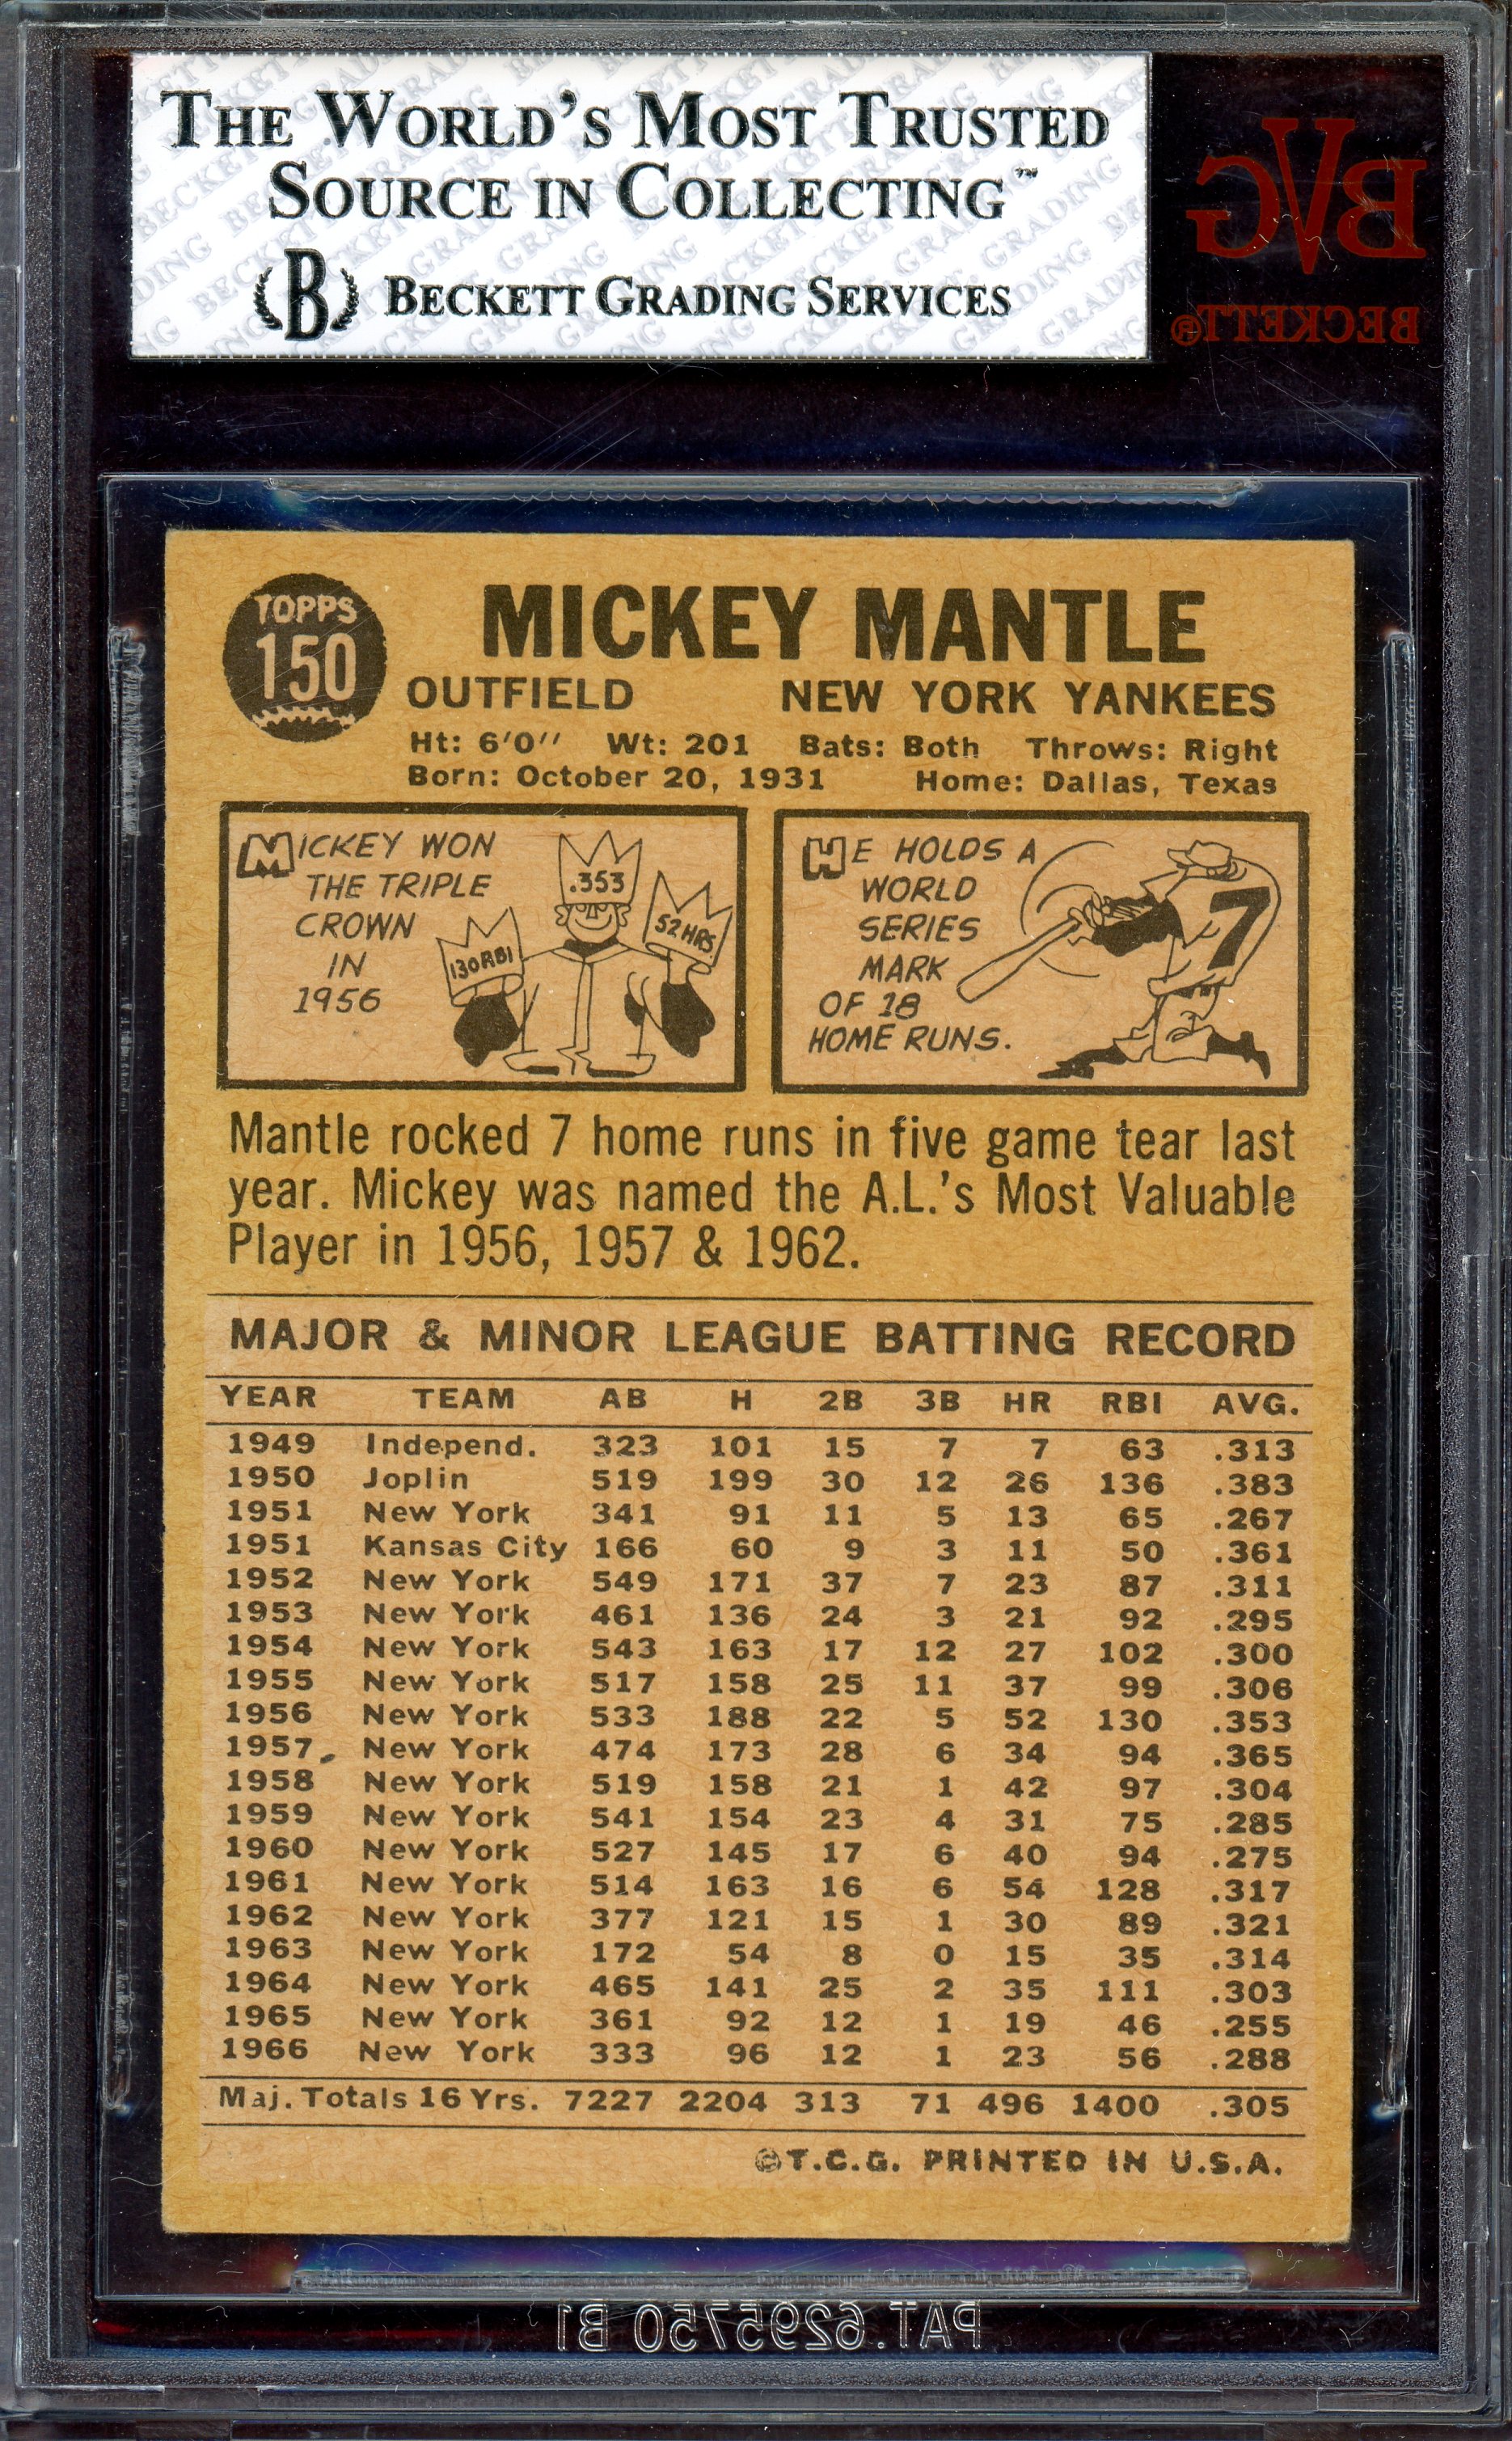 1967 Topps #150 Mickey Mantle back image